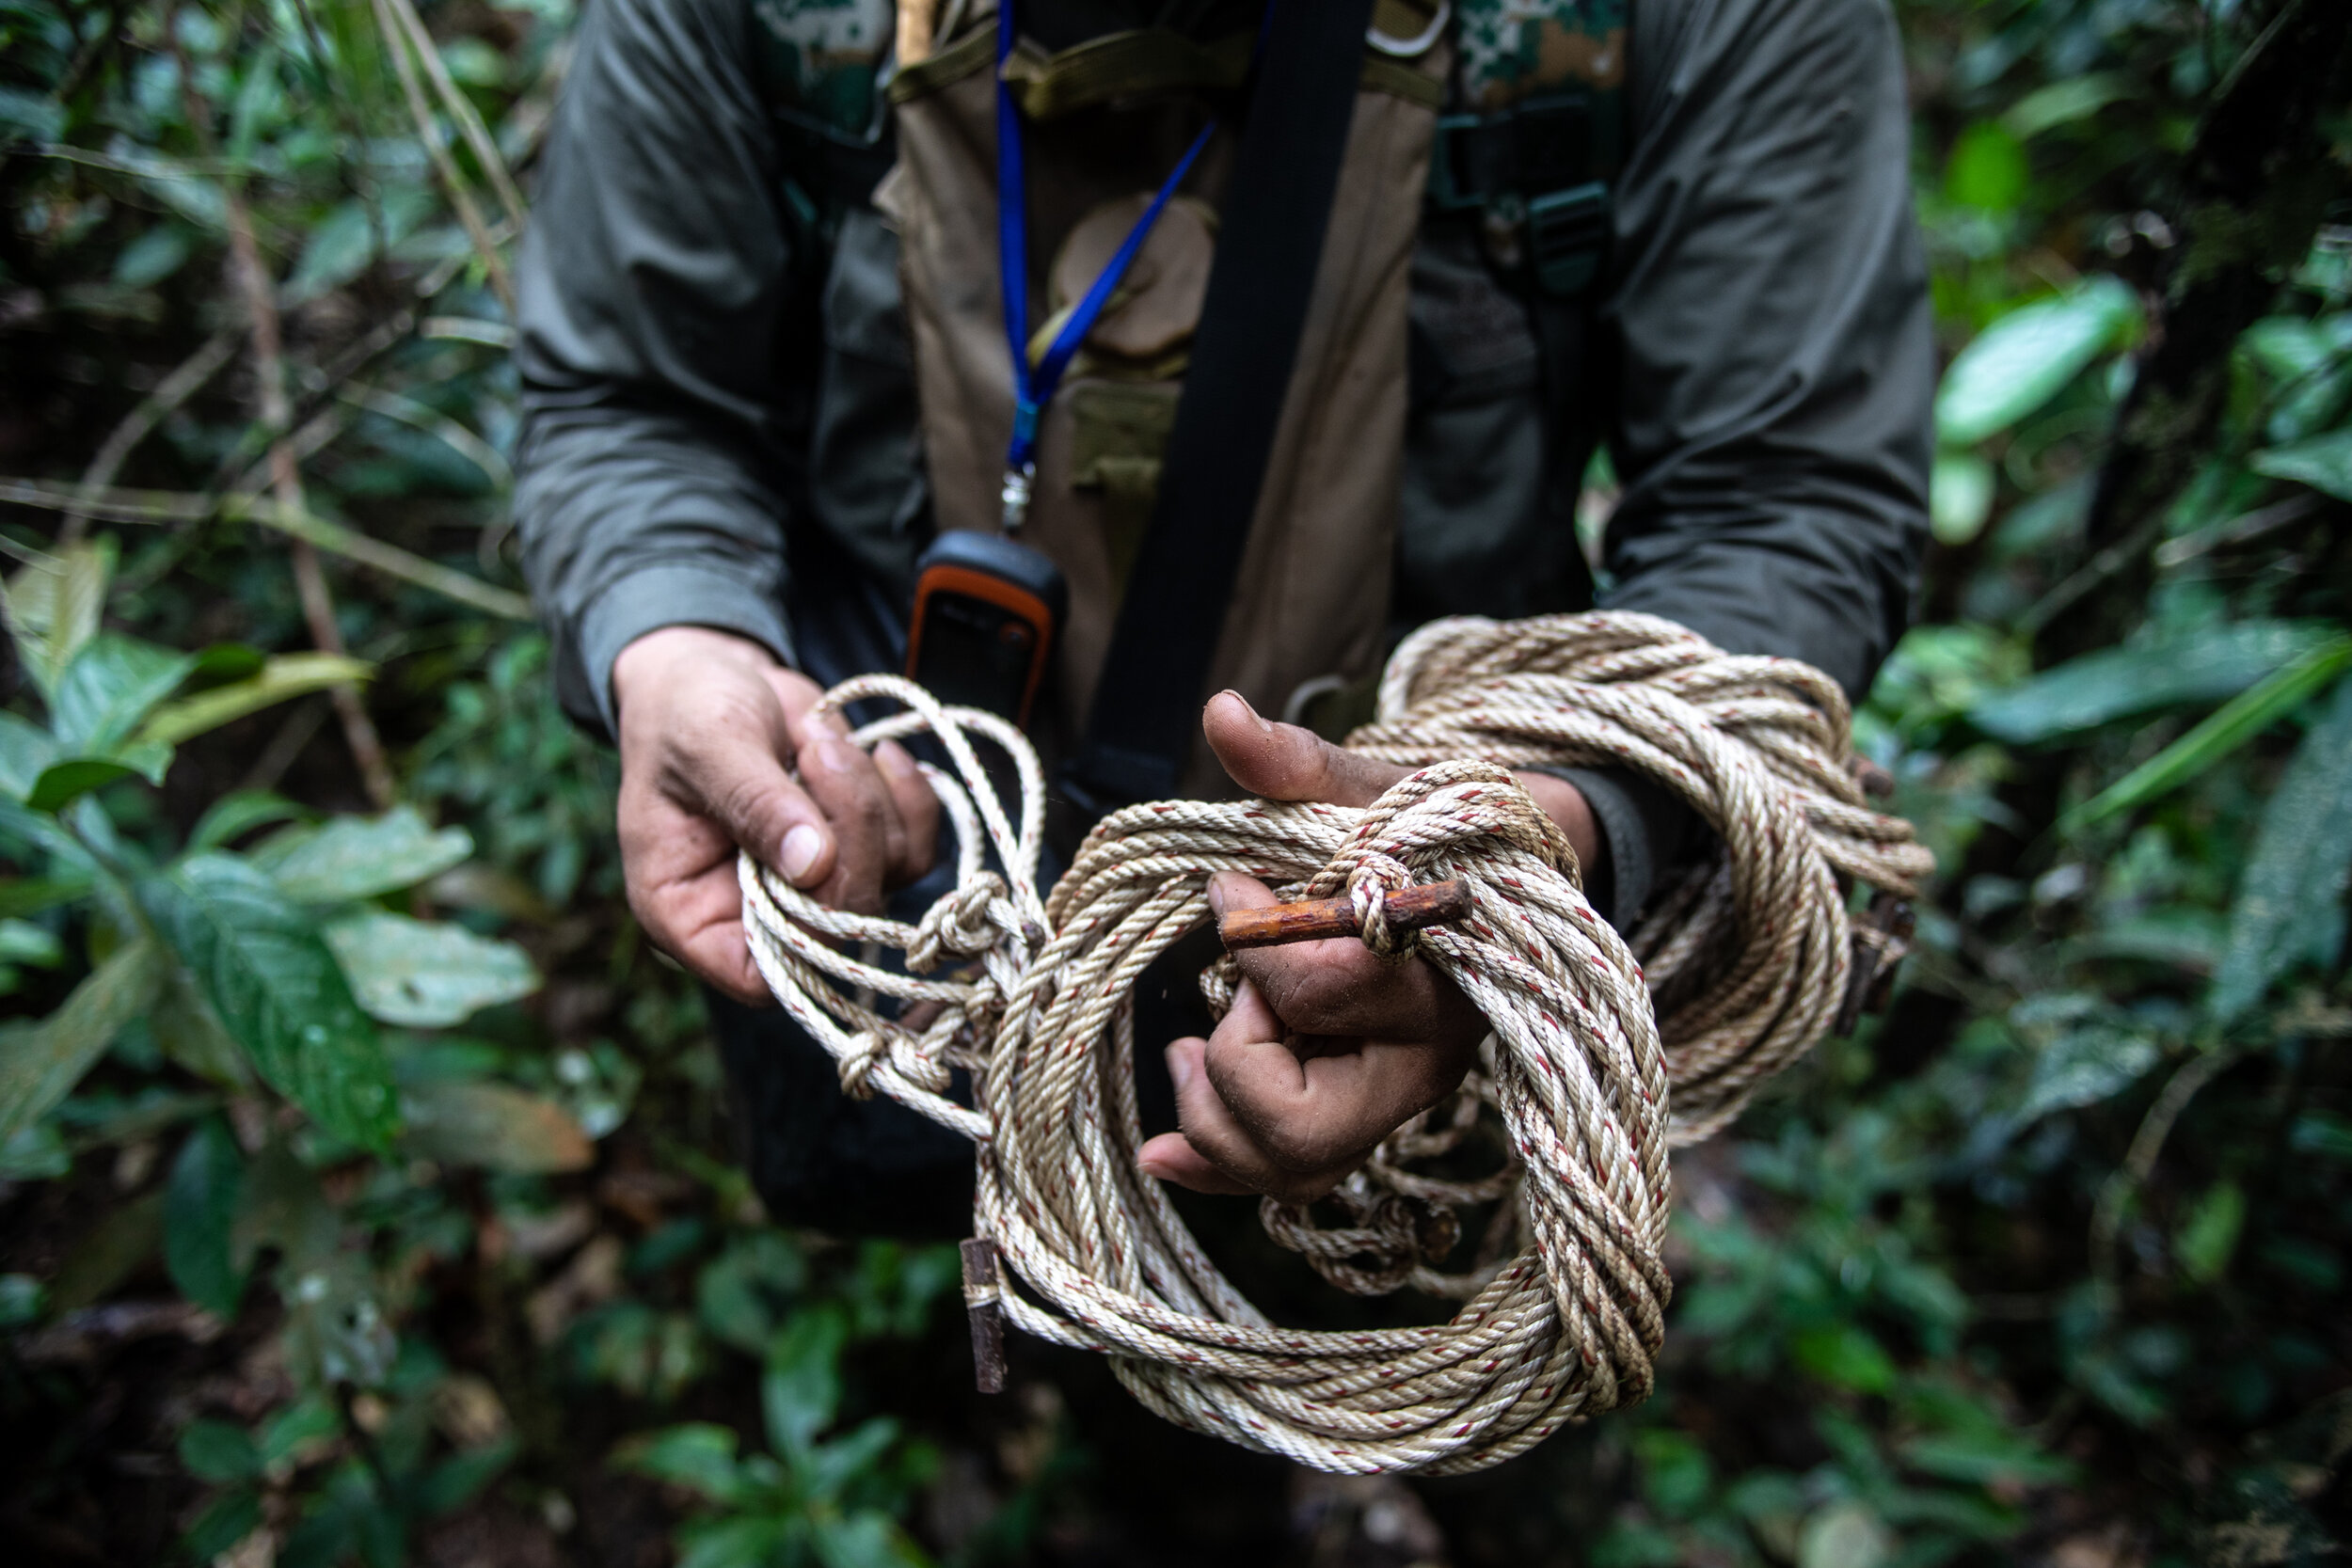  A ranger wraps freshly dismantled snares  to be packed up and brought back to the station.  Snares are considered the single greatest threat to ground dwelling wildlife in Southeast Asia. They are extremely cheap and easy for hunters to make; poache